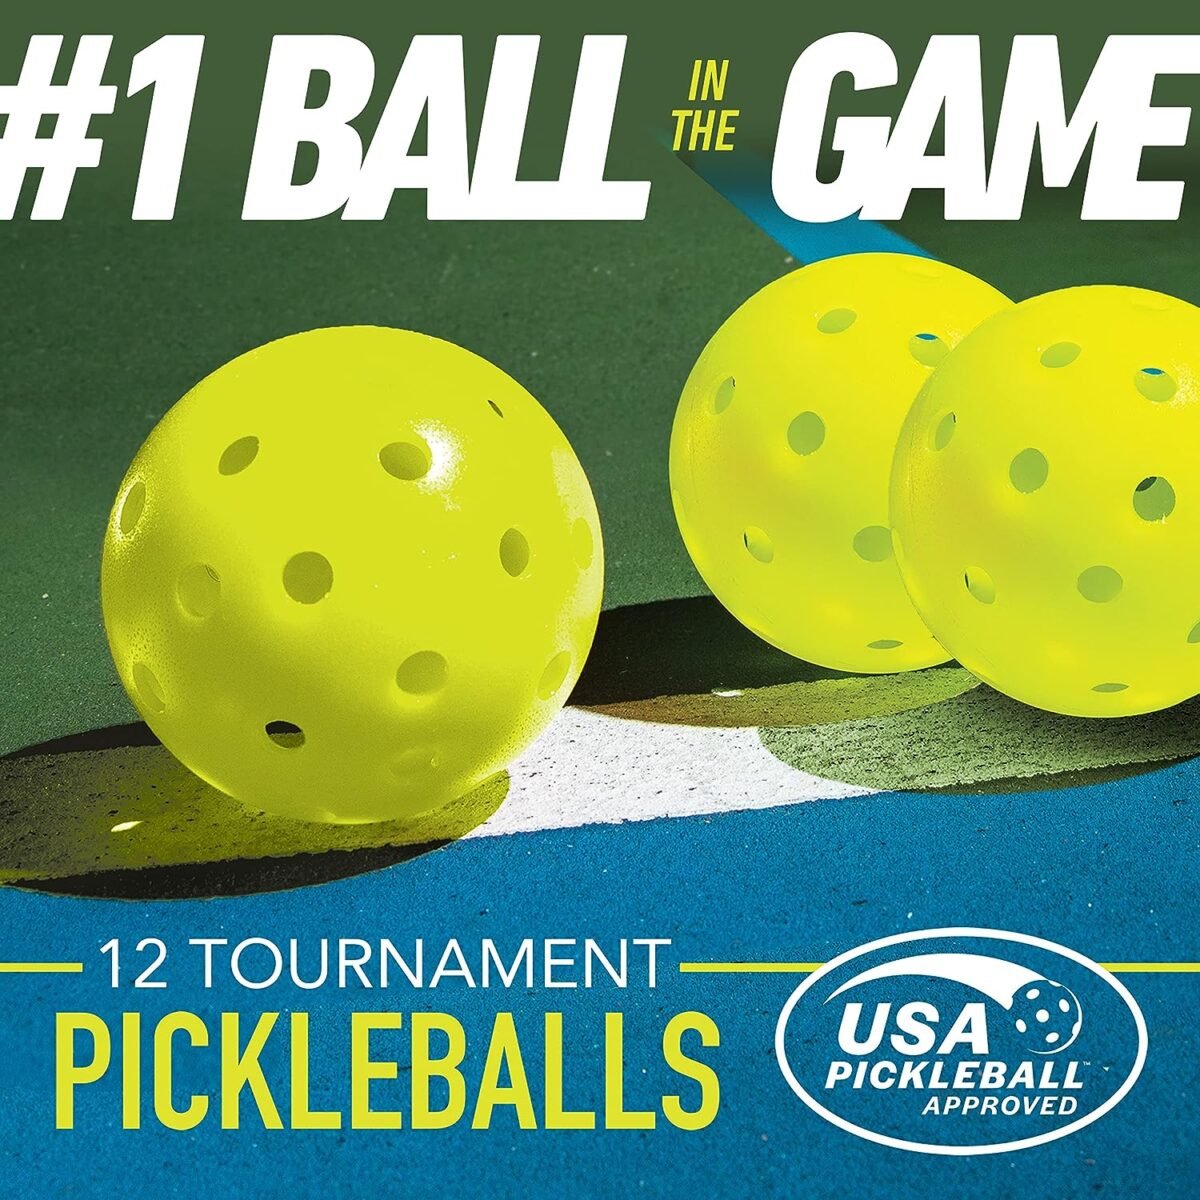 Comparing Top Golf and Pickleball Balls